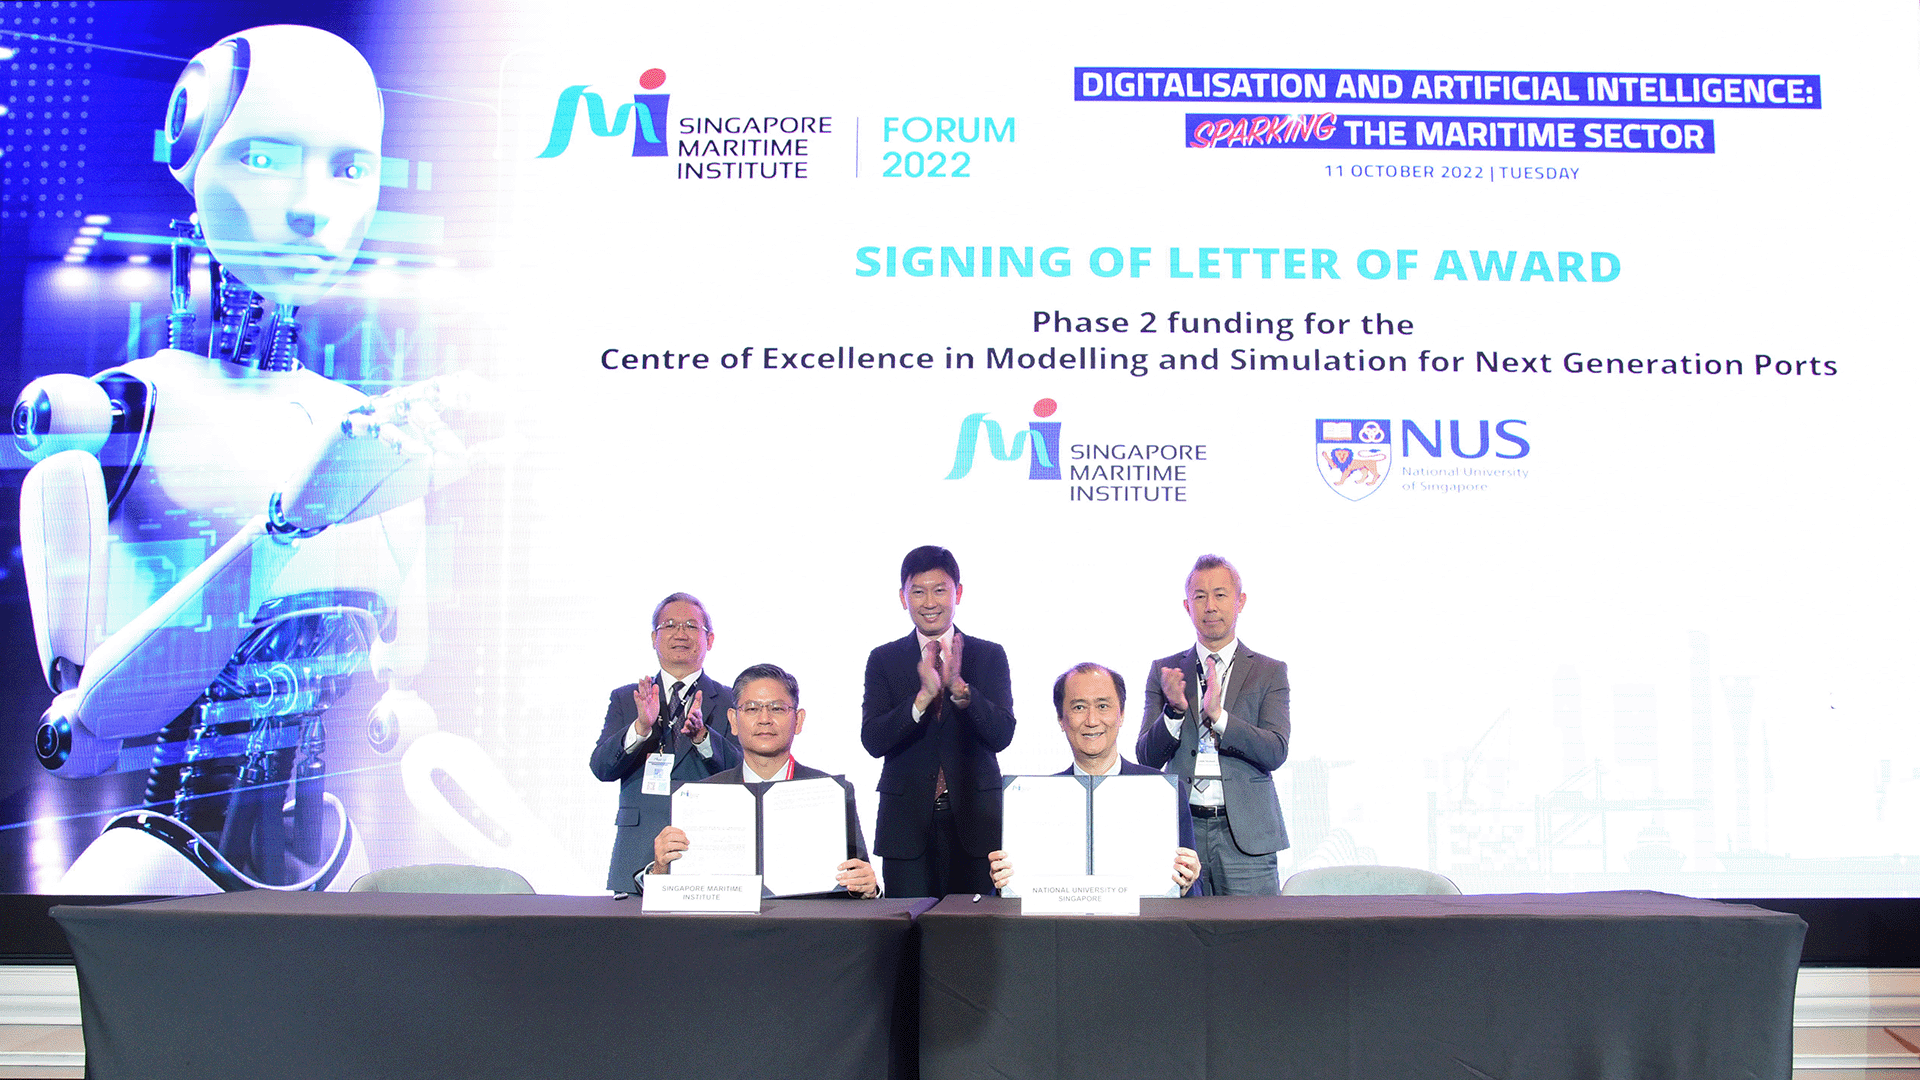 Signing of the Letter of Award for the Phase 2 funding for the Centre of Excellence in Modelling and Simulation for Next Generation Ports